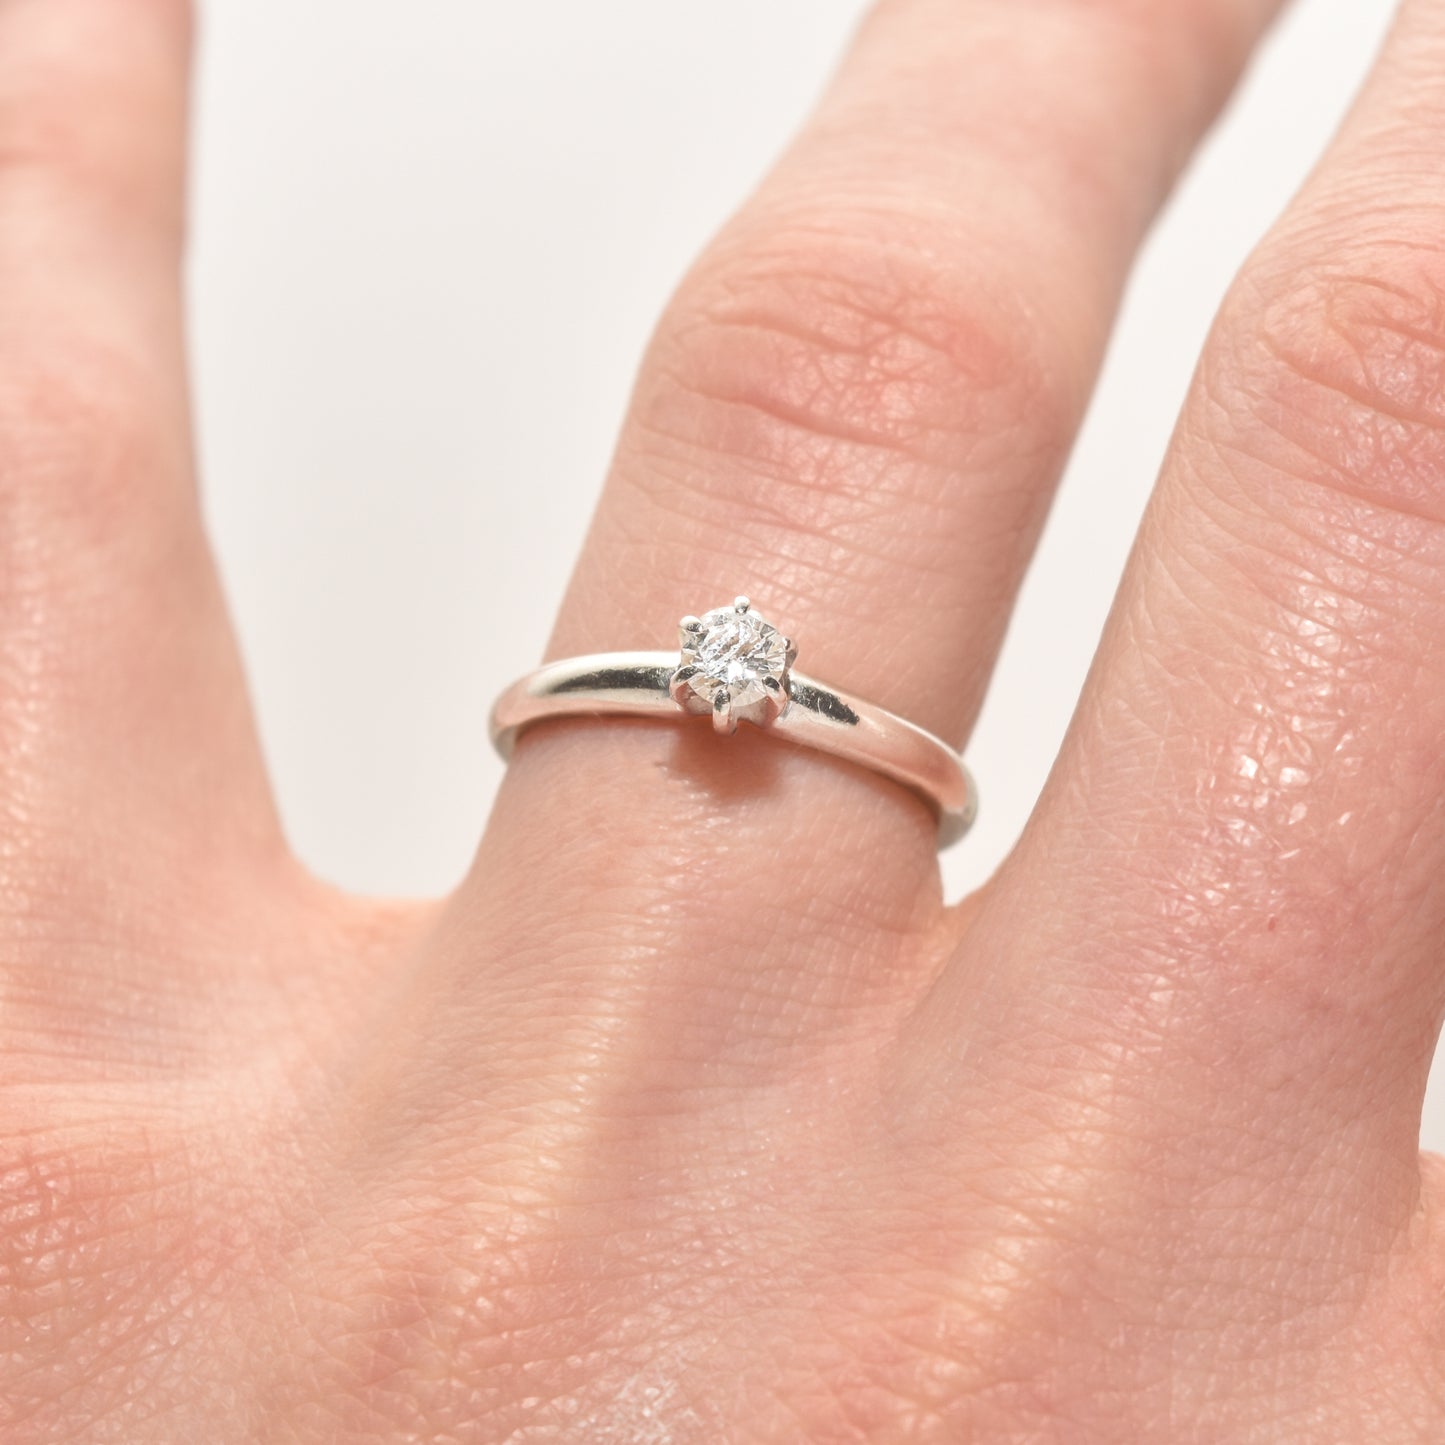 Minimalist 14K white gold engagement ring with 0.25 carat brilliant solitaire diamond on a size 6.25 finger.